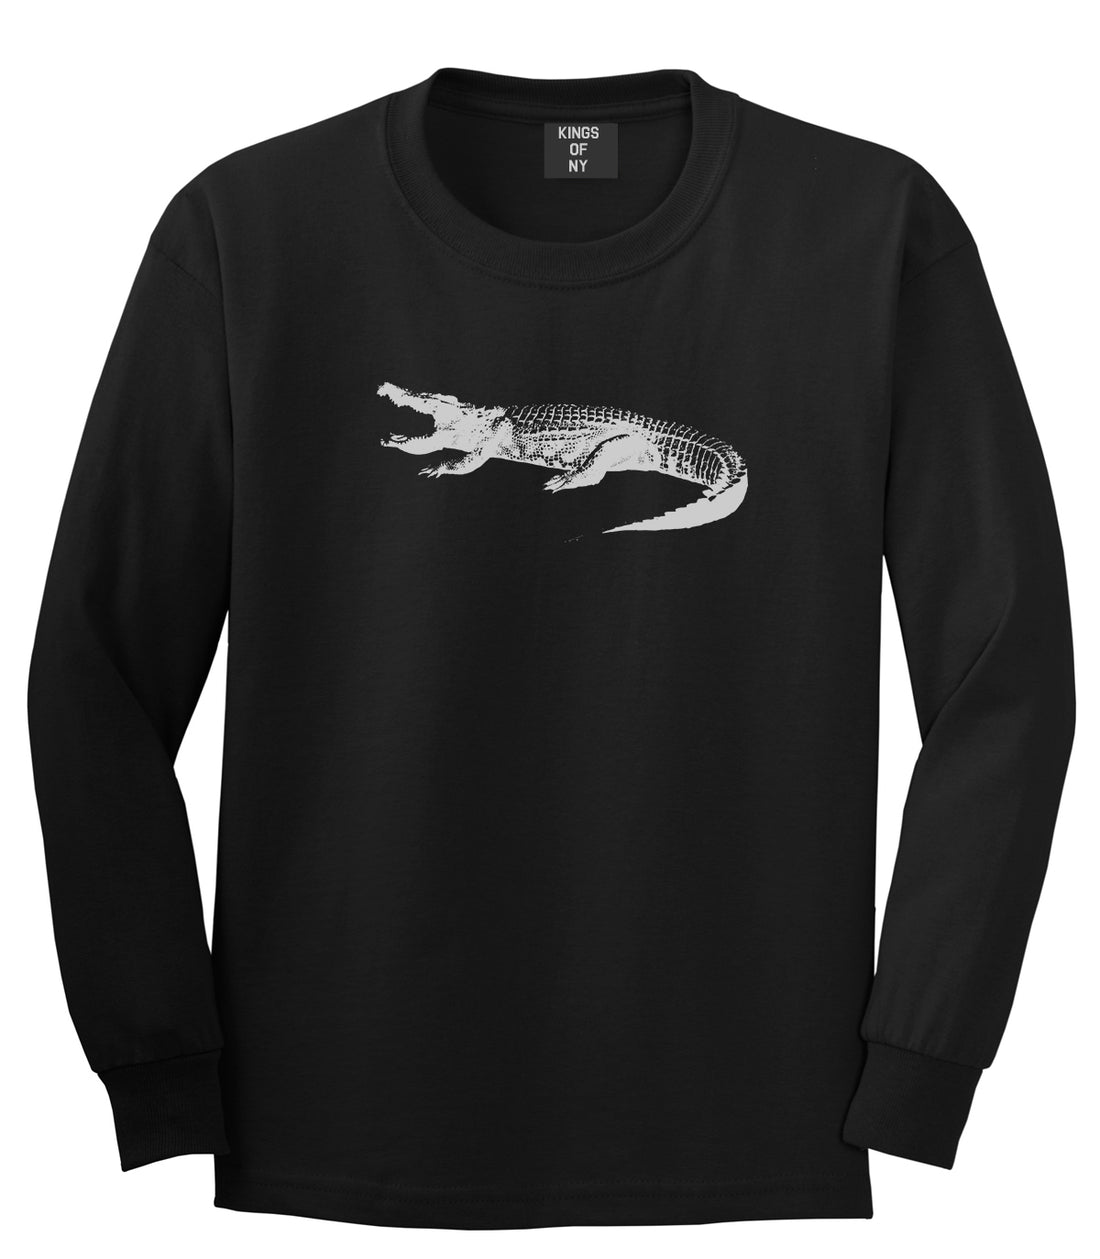 Alligator Black Long Sleeve T-Shirt by Kings Of NY